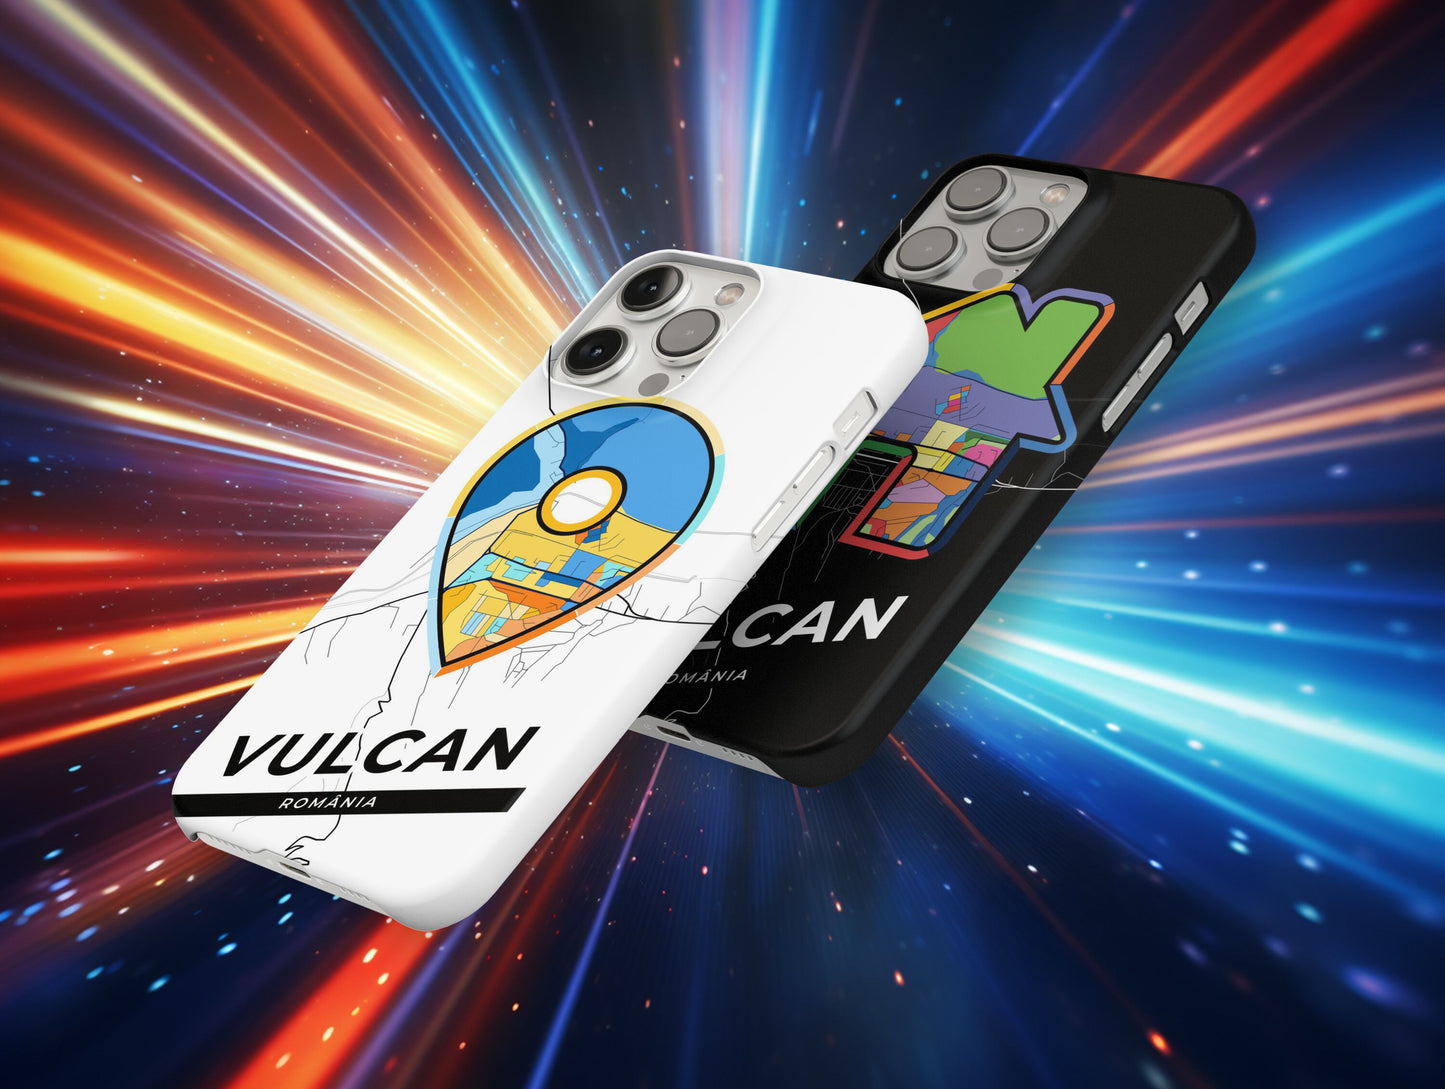 Vulcan Romania slim phone case with colorful icon